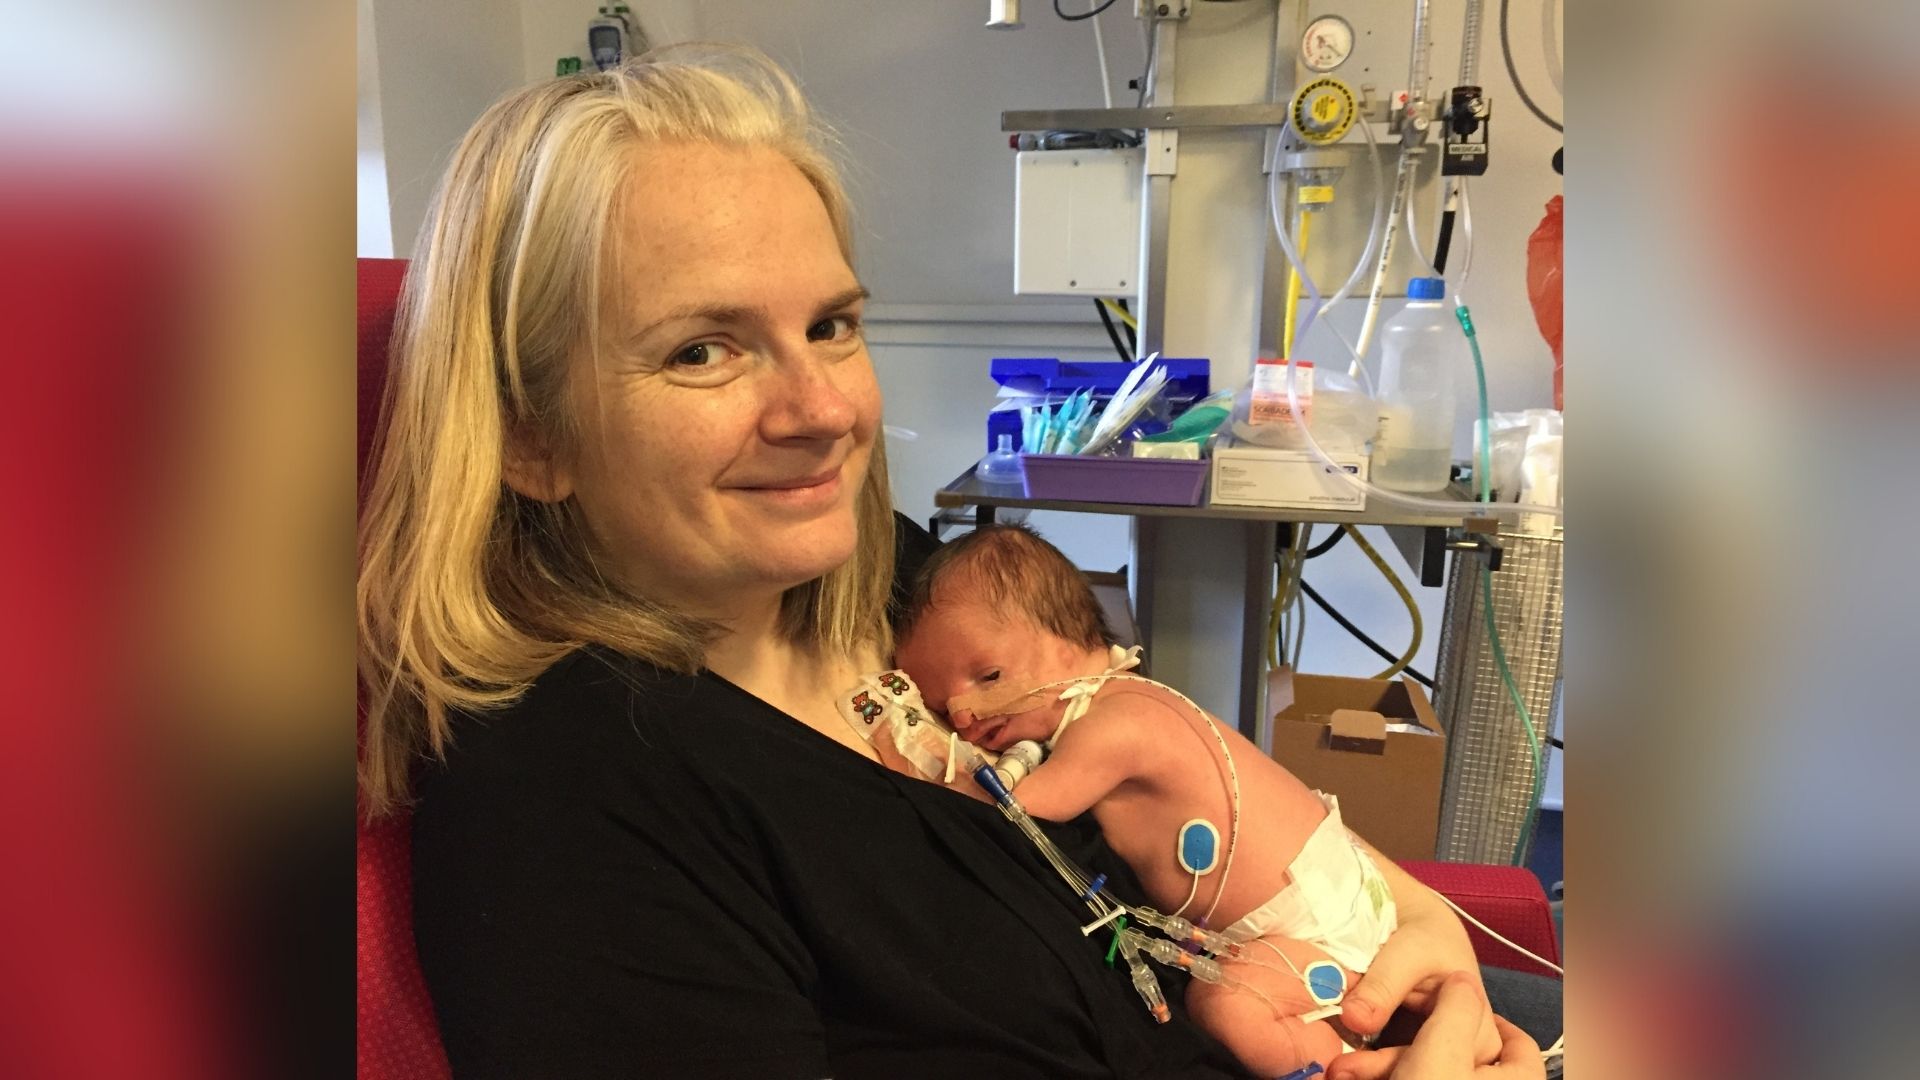 Kate, a white woman in her 30s, who has platinum blonde hair. She's wearing a black cardigan and smiling at the camera. She's holding her son William on her chest, a newborn baby who has treacher collins syndrome. There's hospital equipment in the background and William is attached to various machines.